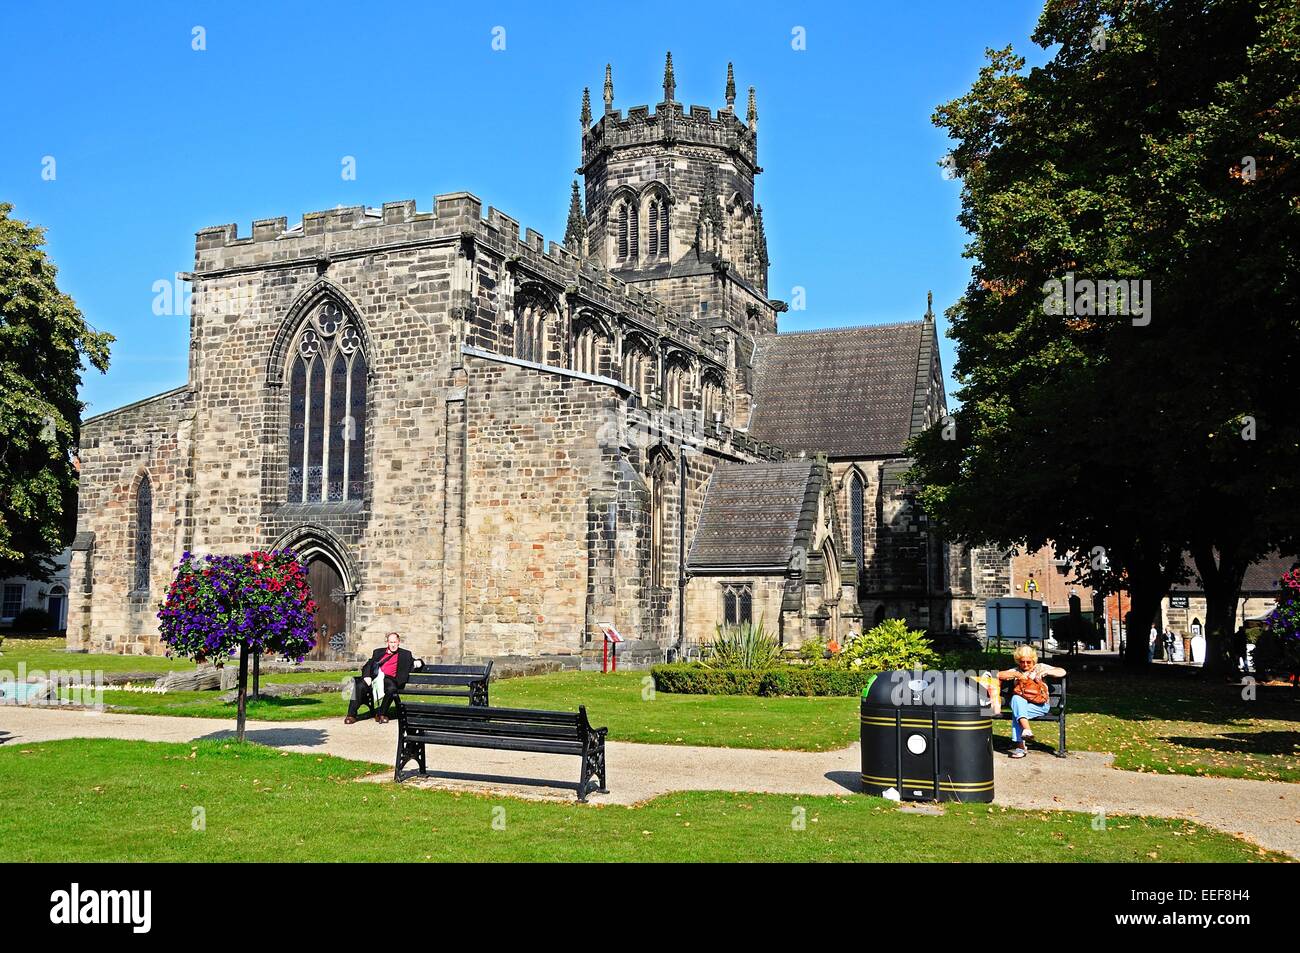 Collegiate Church of St Mary, Stafford, Staffordshire, England, UK, Western Europe. Stock Photo